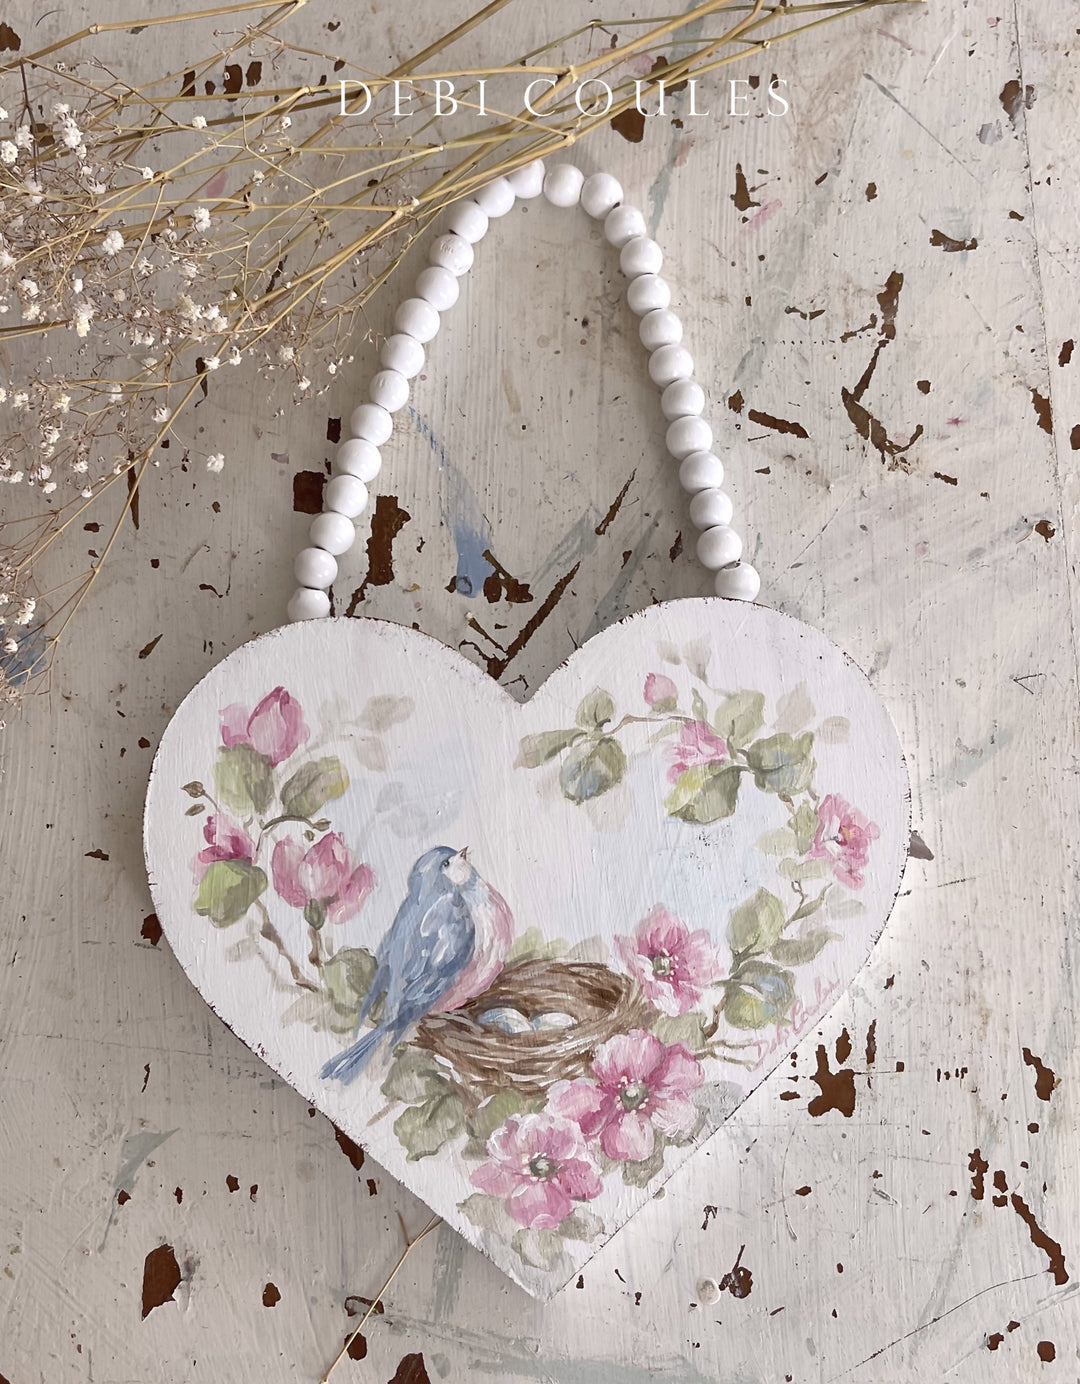 Shabby Chic Large Wood Bluebird Roses and Nest With Eggs Heart Original by Debi Coules (Copy)